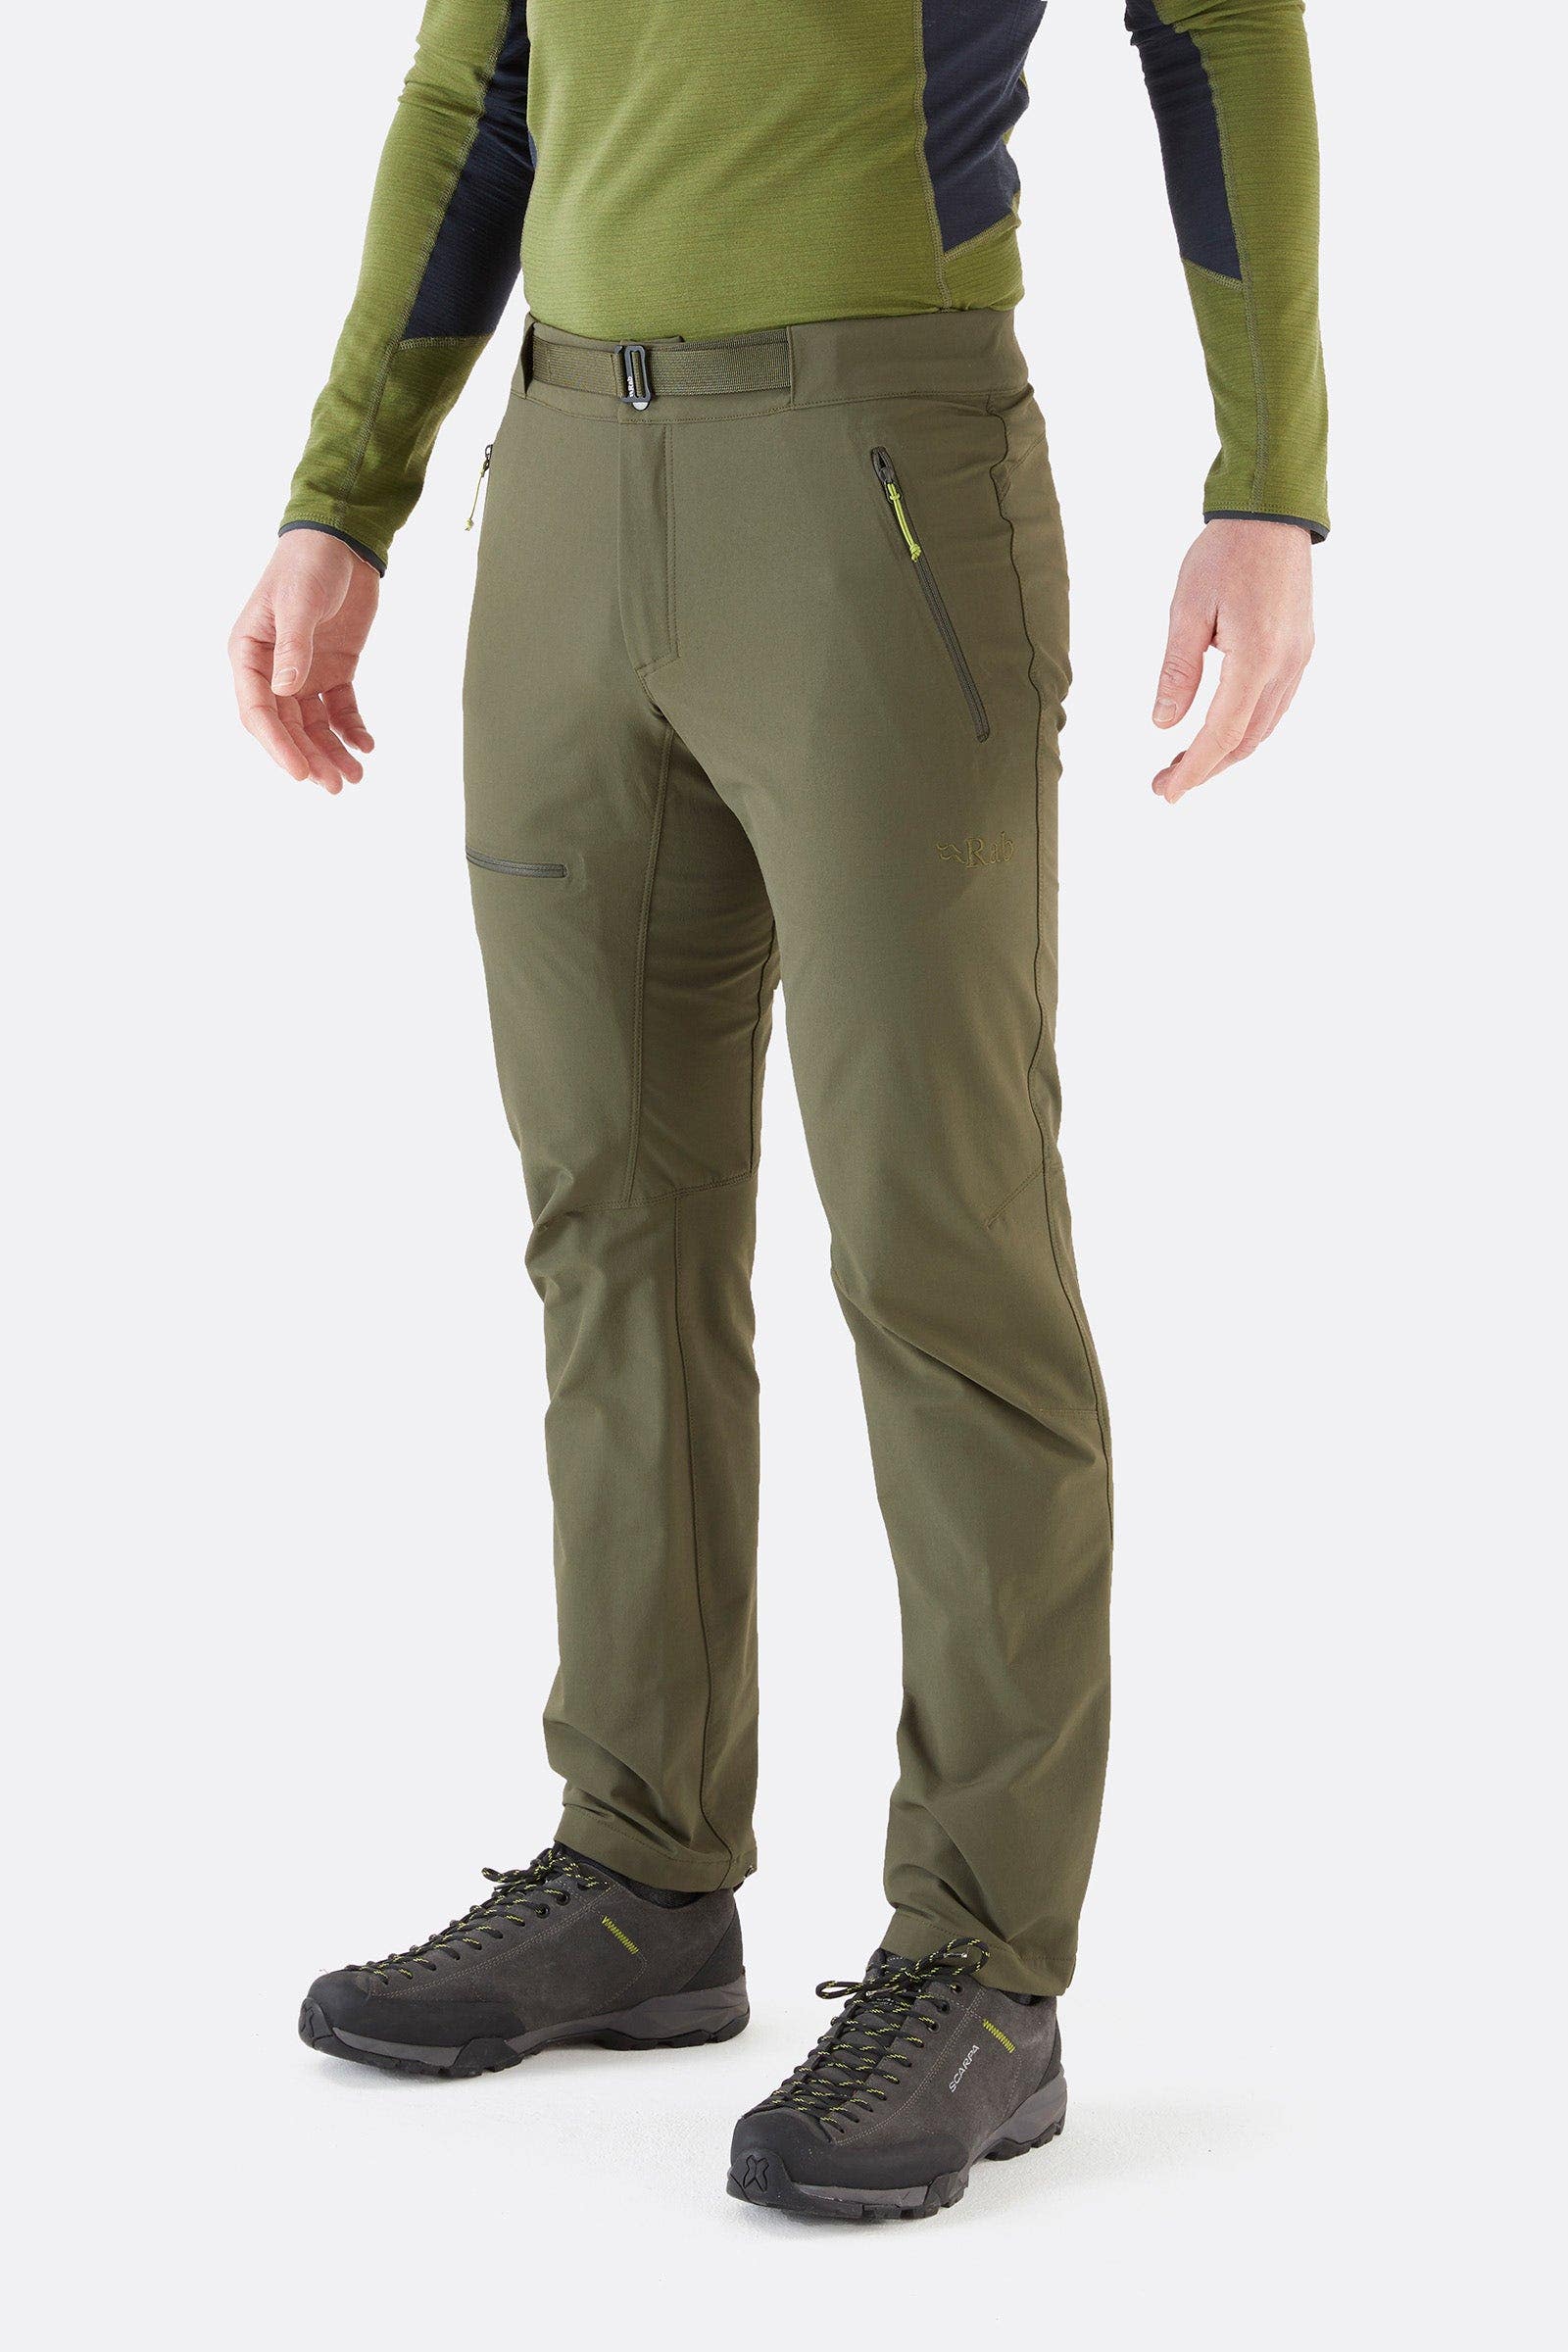 Men's Incline AS Softshell Pants Army